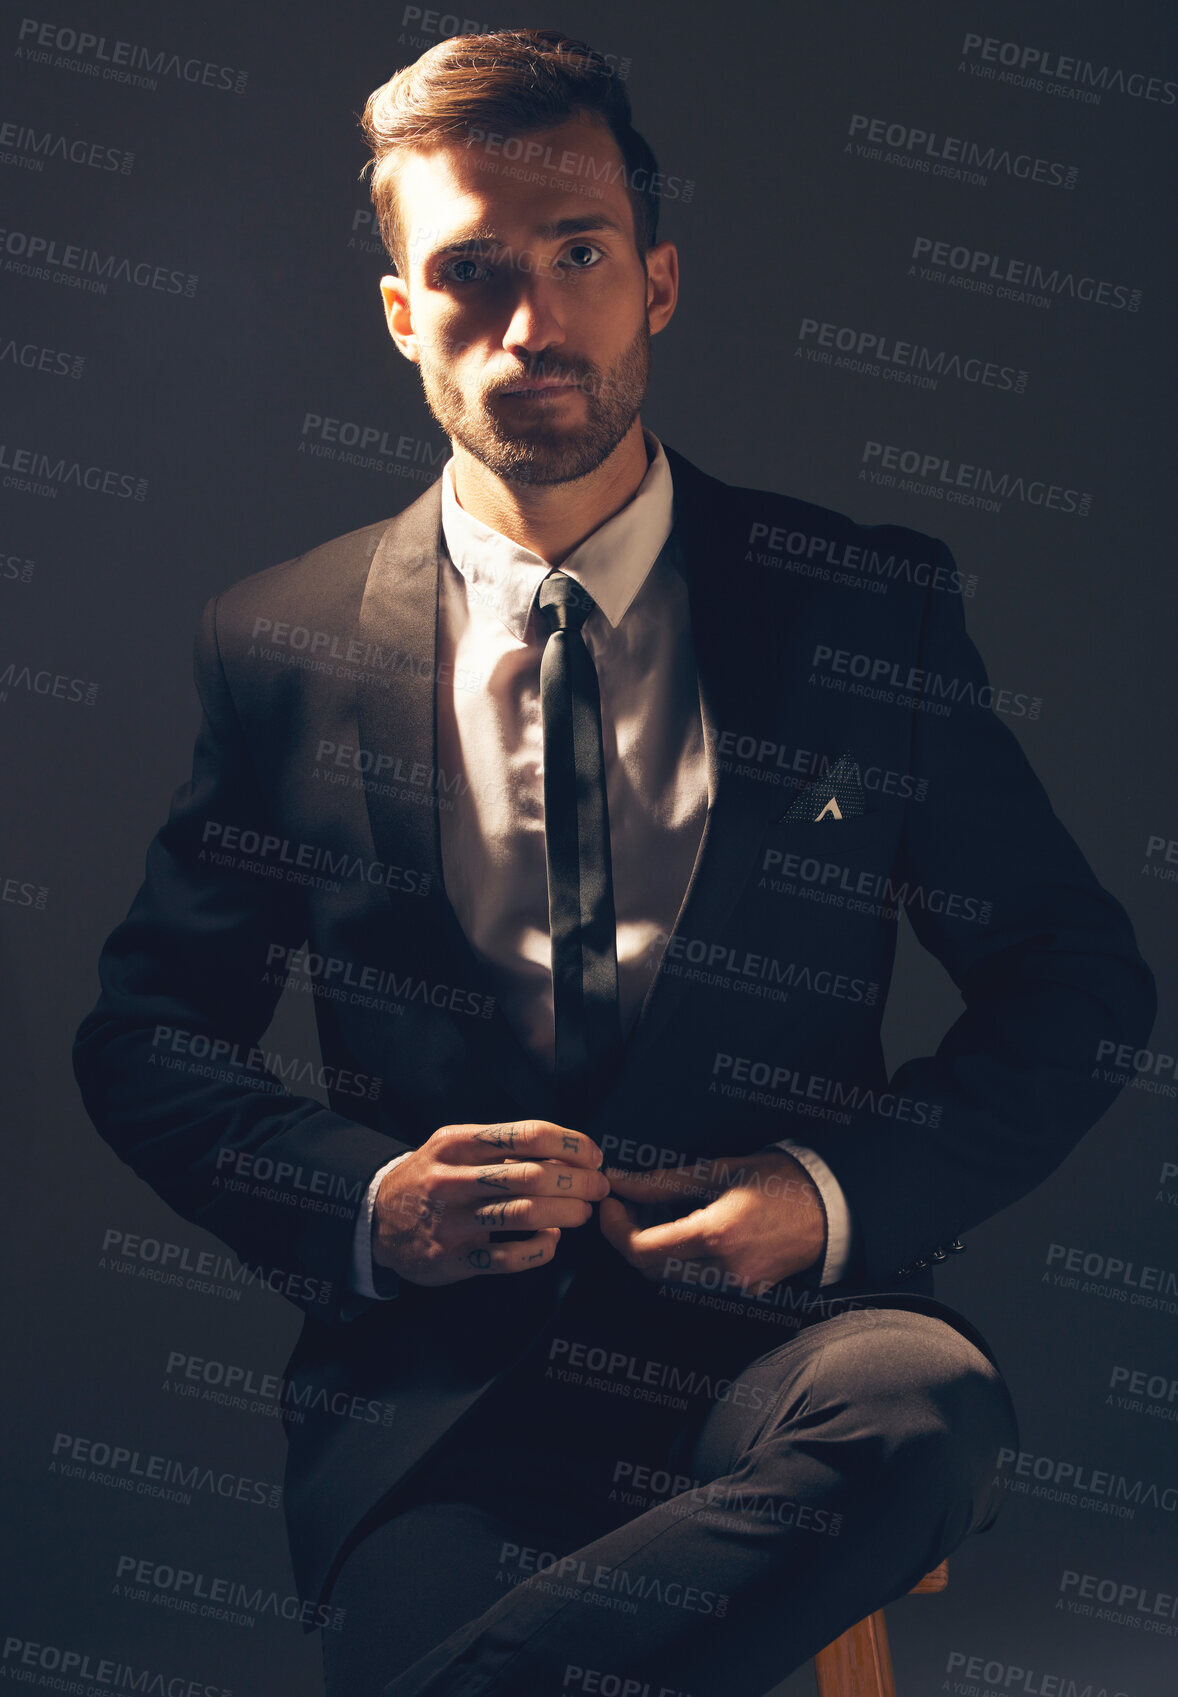 Business Man, Tattoos, Tie, Suit, Best Dressed, Corporate by Candice Cason.  Photo stock - StudioNow